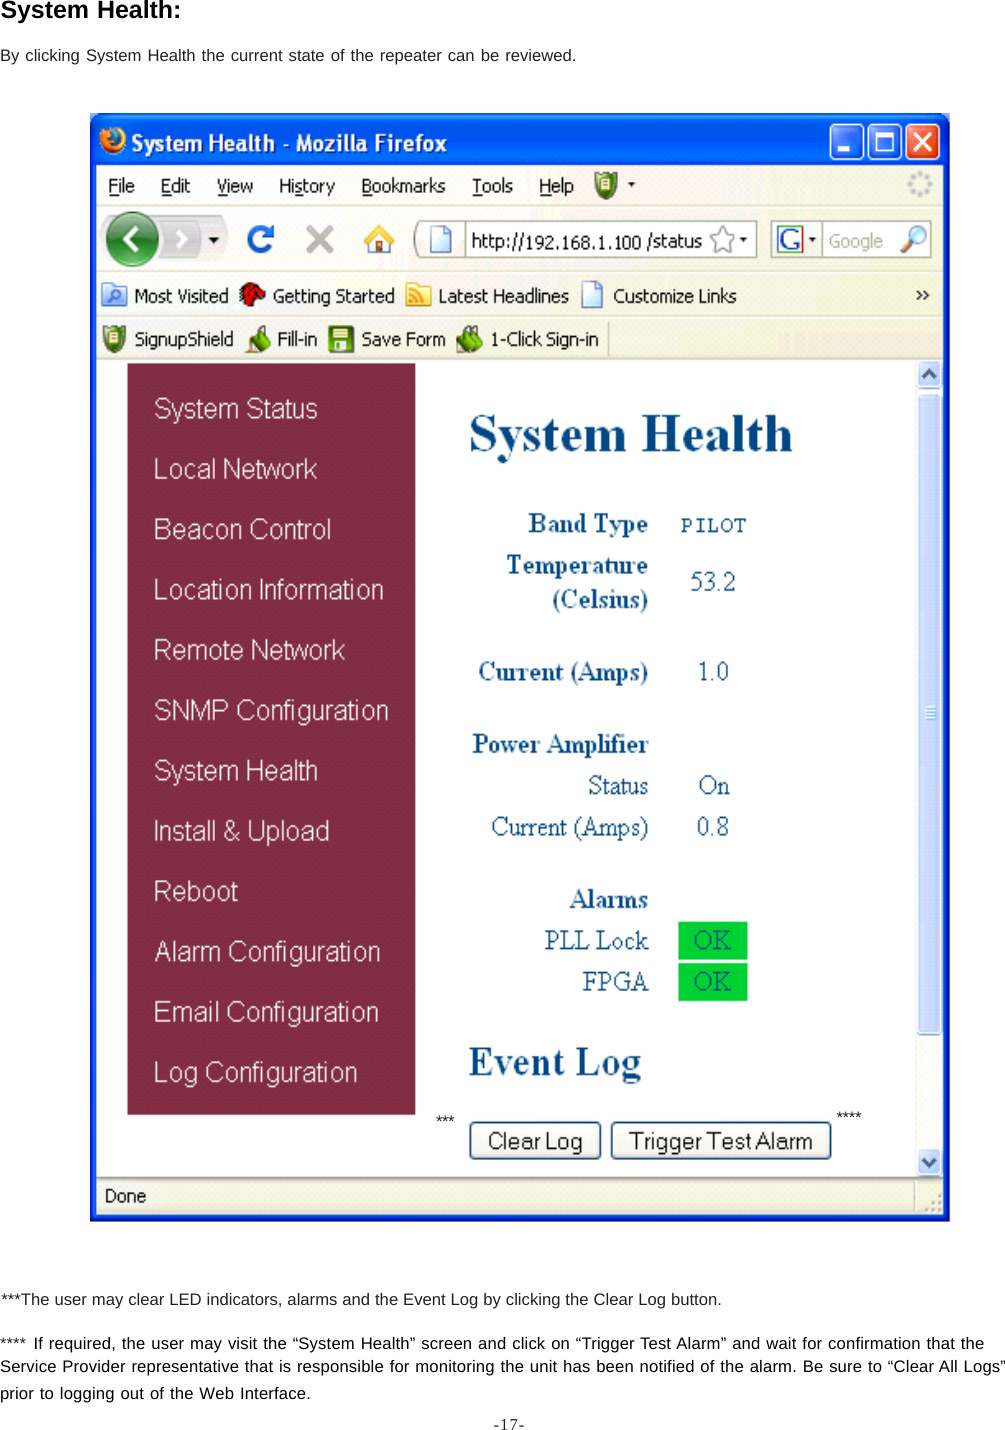 -17-By clicking System Health the current state of the repeater can be reviewed.System Health:**** If required, the user may visit the “System Health” screen and click on “Trigger Test Alarm” and wait for confirmation that theService Provider representative that is responsible for monitoring the unit has been notified of the alarm. Be sure to “Clear All Logs”prior to logging out of the Web Interface.*******The user may clear LED indicators, alarms and the Event Log by clicking the Clear Log button.***